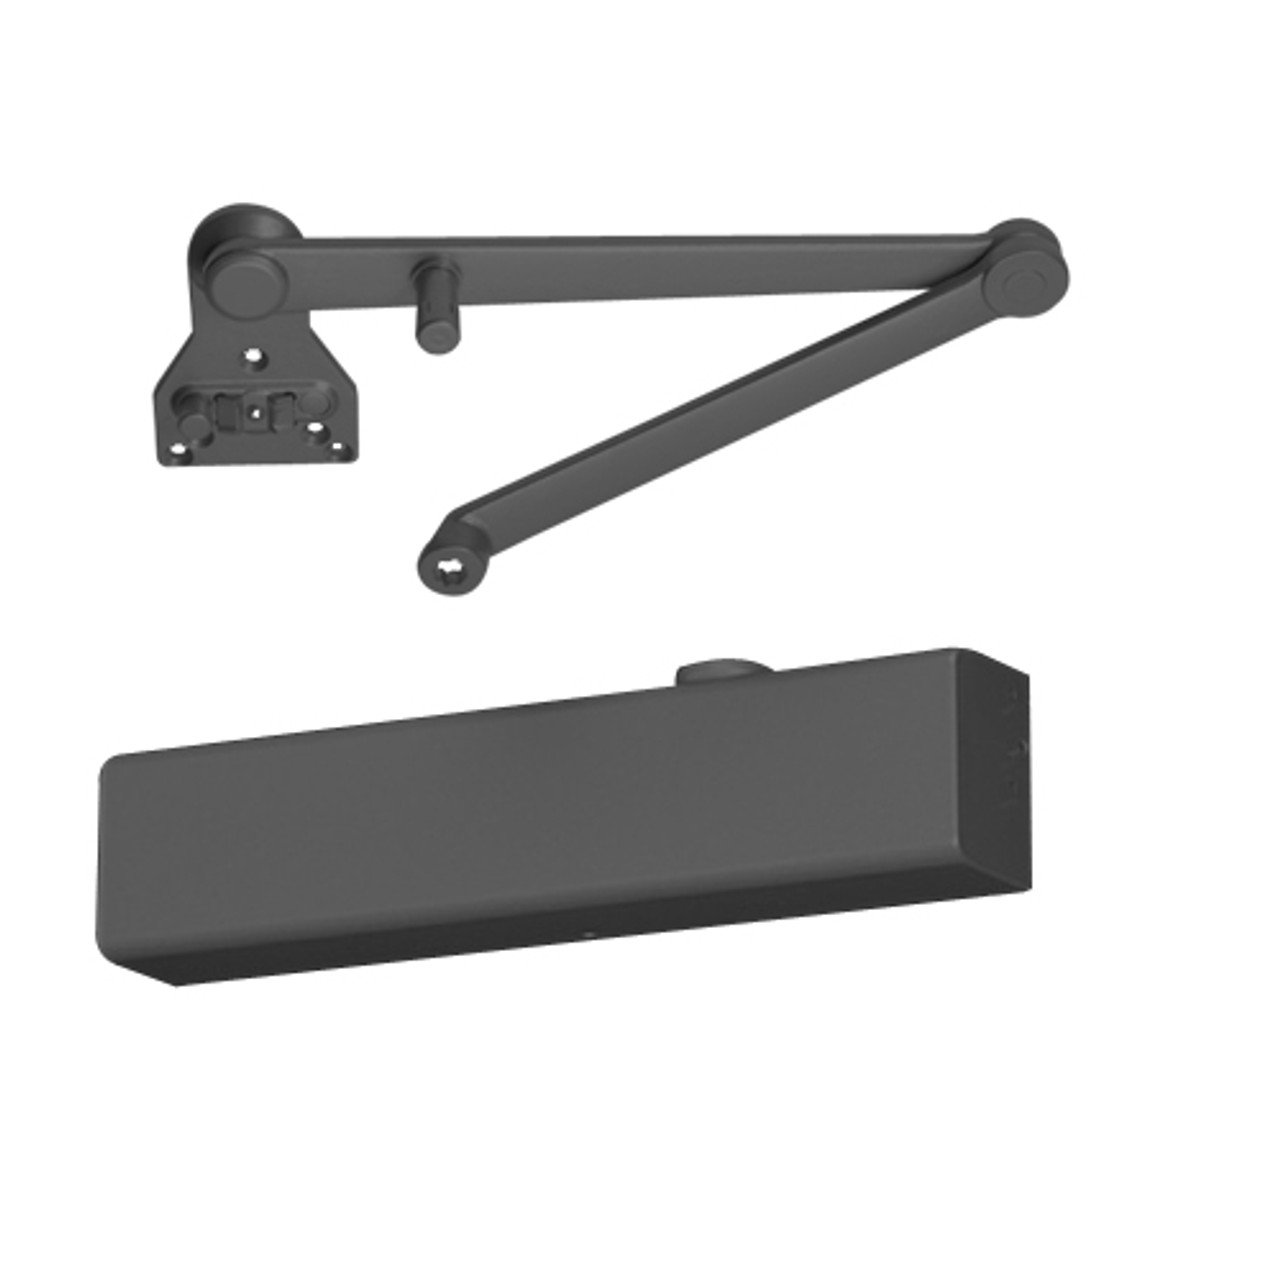 CLP8501RM-693 Norton 8000 Series Full Cover Hold Open Door Closers with CloserPlus Ramp Arm in Black Finish